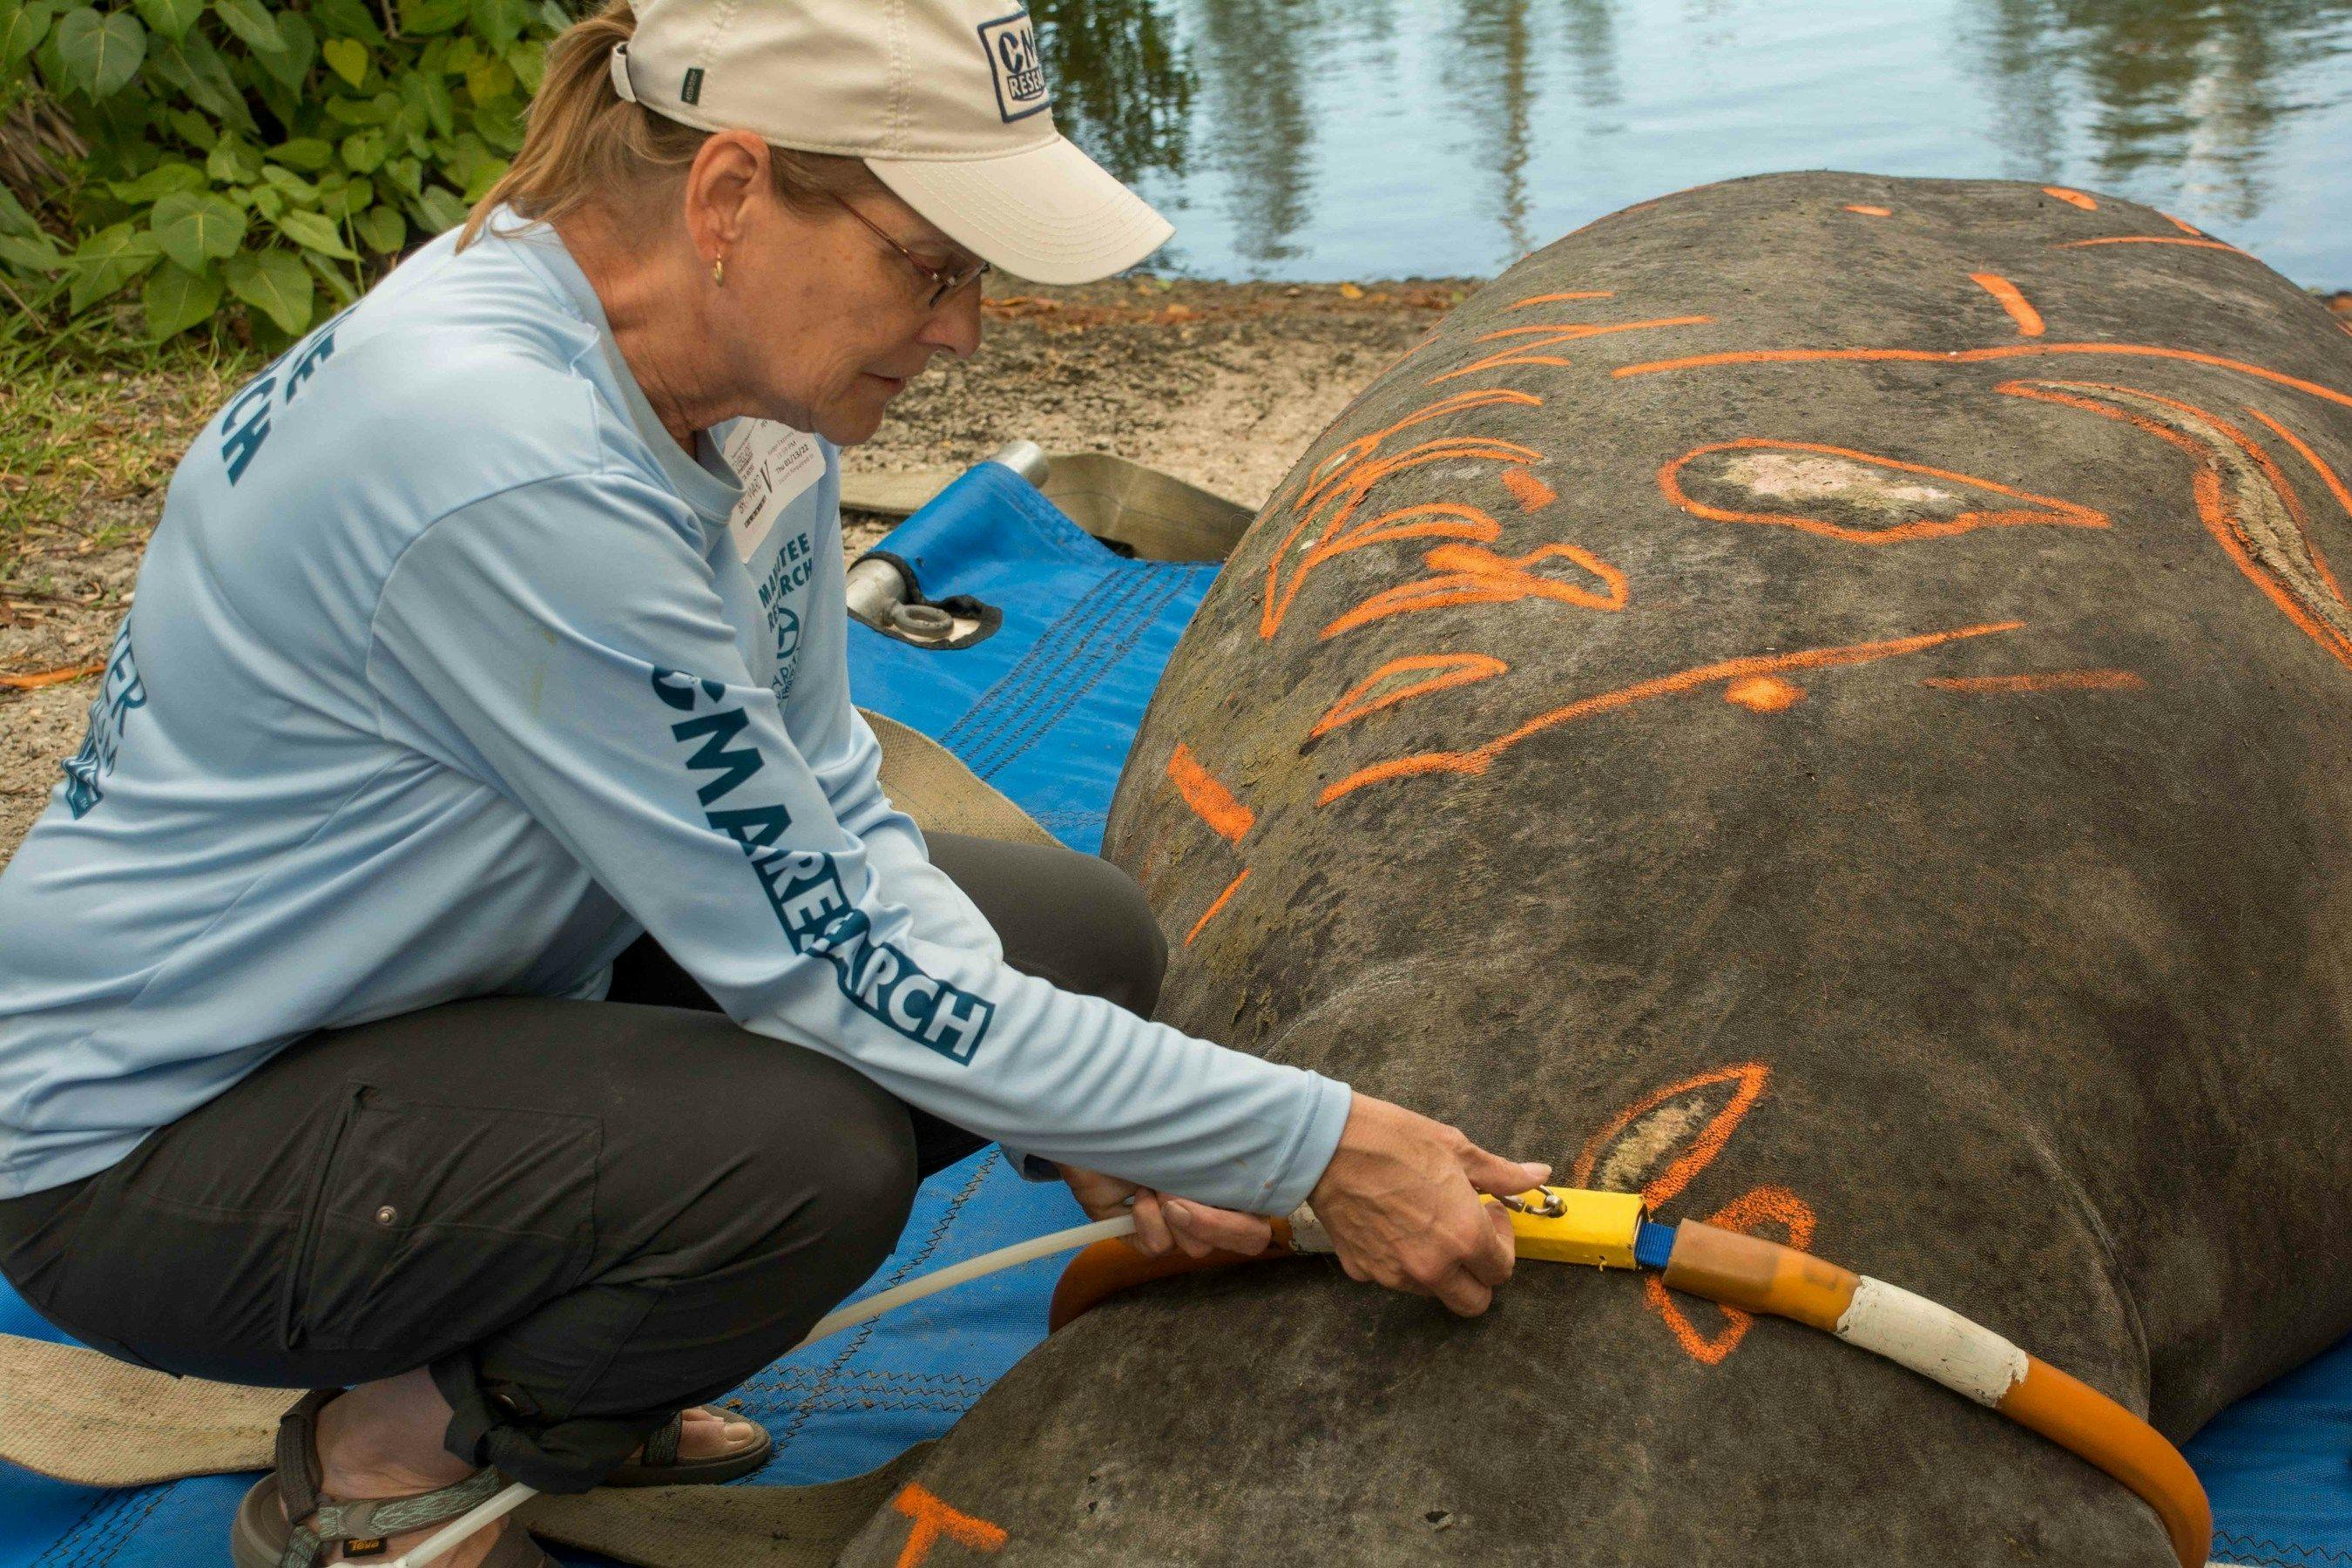 Monica Ross tags a manatee for monitoring. (Photo credit: Paul Krashefski, Broward County Natural Resources Division.)